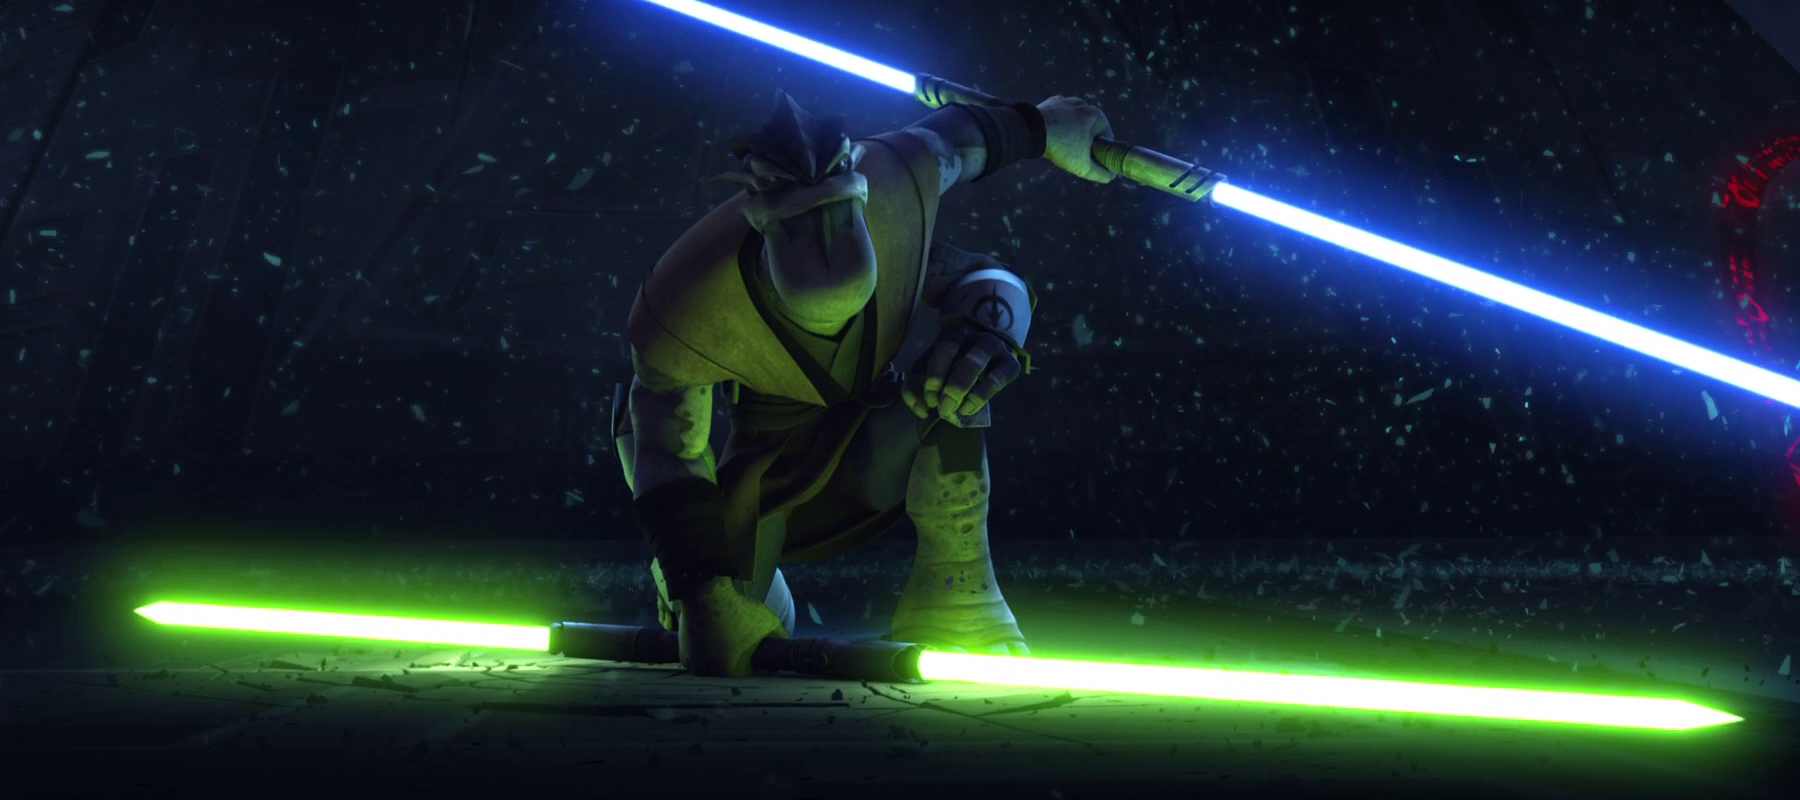 Pong Krell’s two Double Bladed Lightsabers